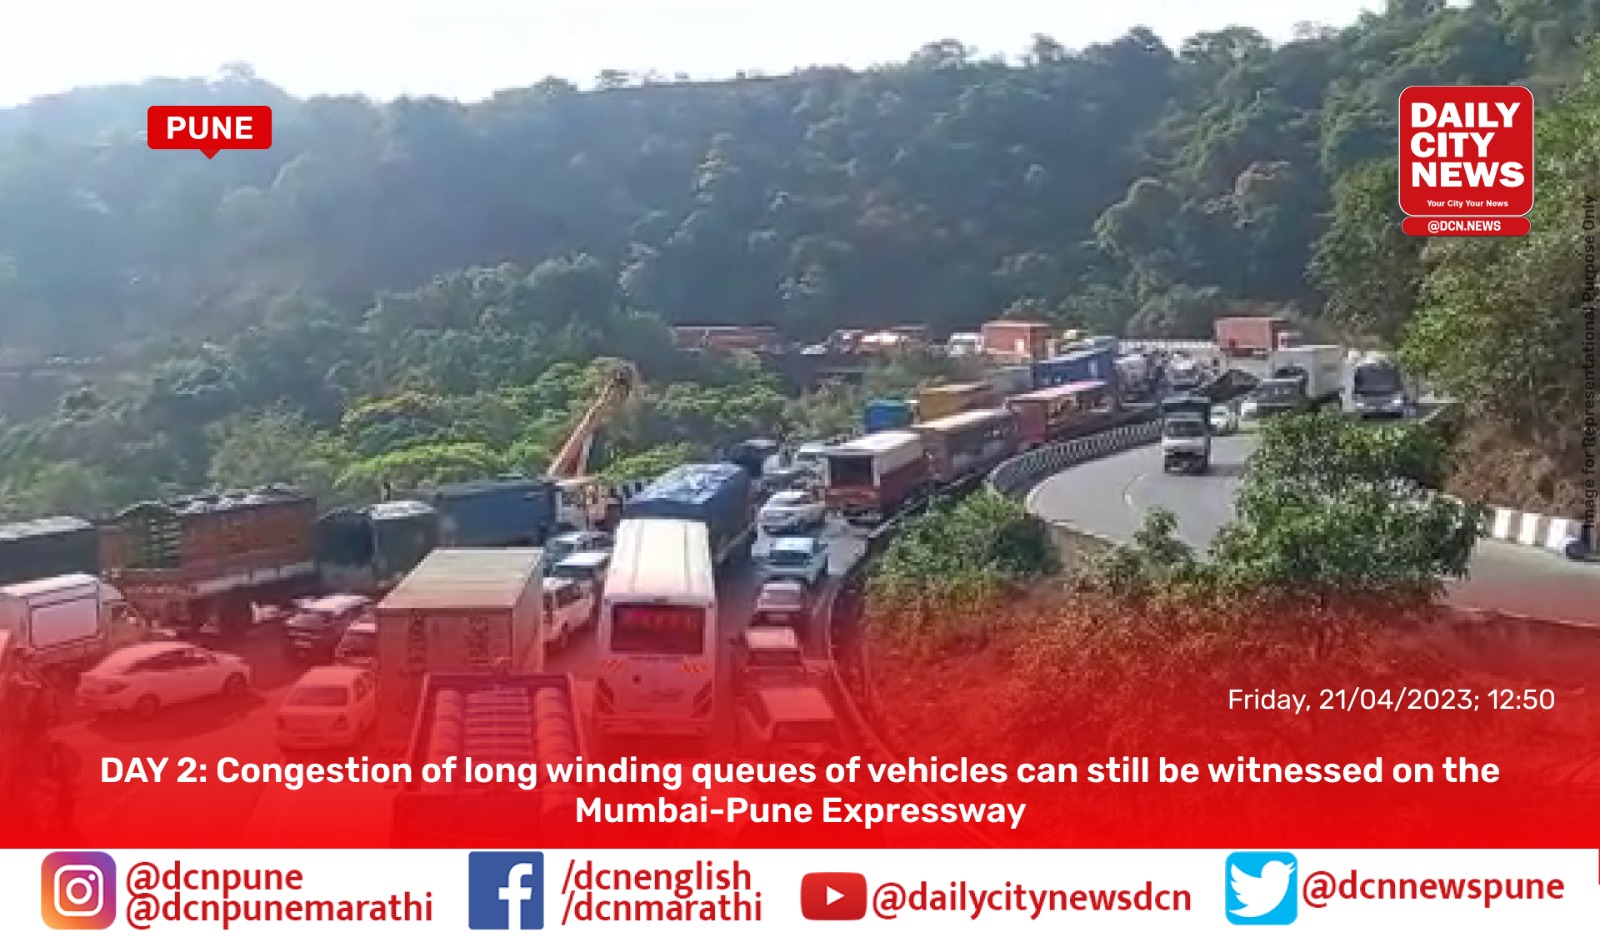 DAY 2: Congestion of long winding queues of vehicles can still be witnessed on the Mumbai-Pune Expressway